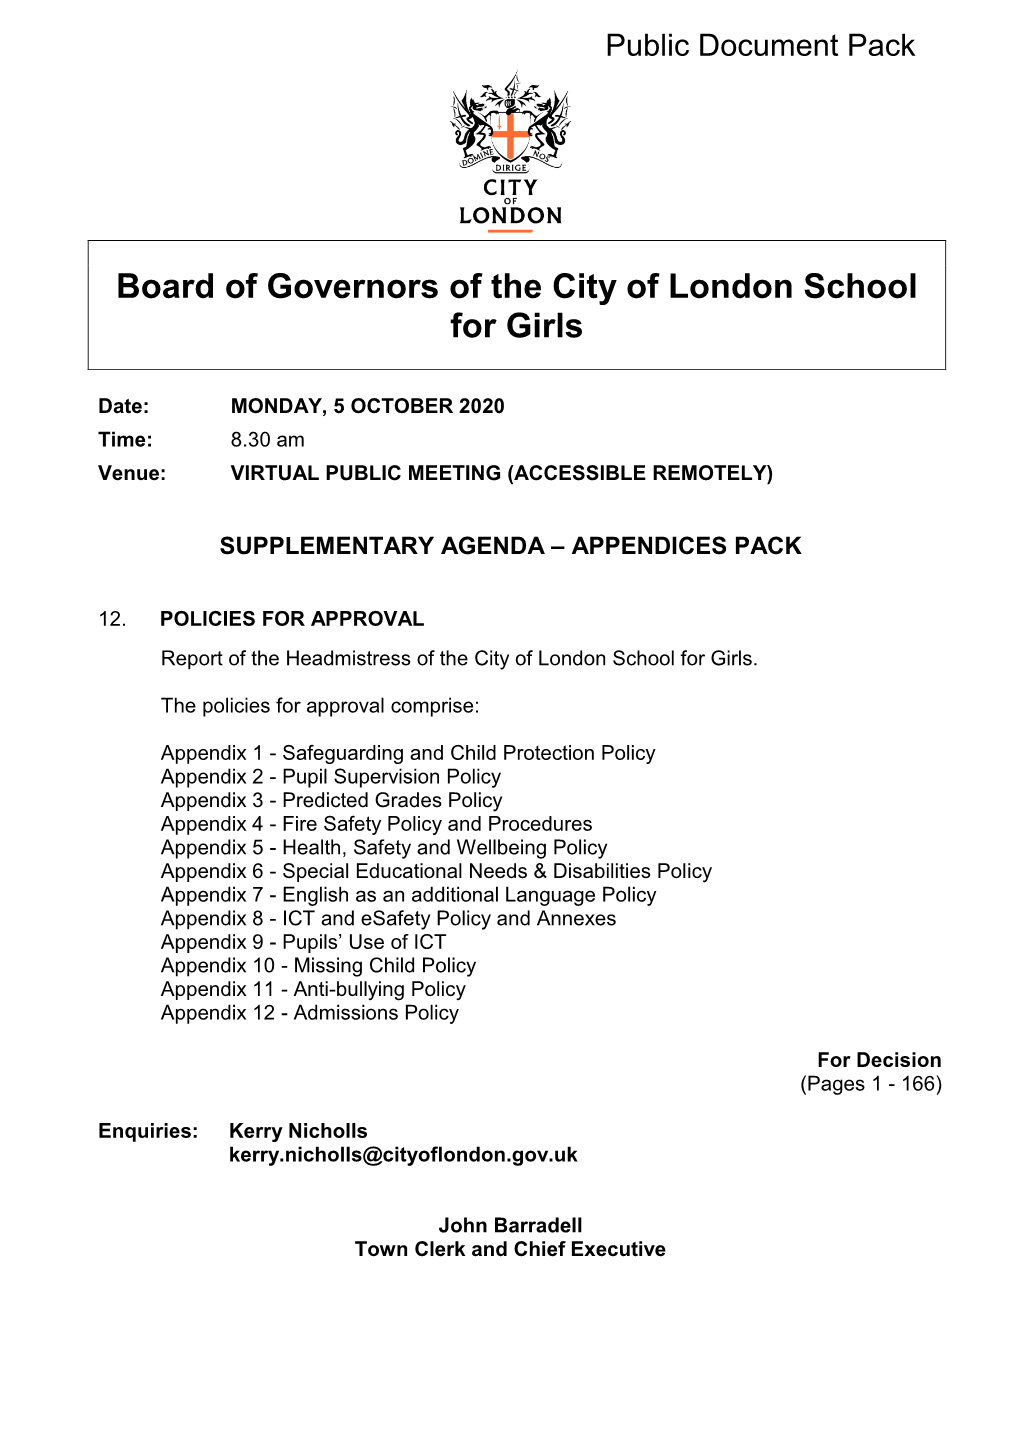 (Public Pack)Item 12: Policies for Approval Agenda Supplement For